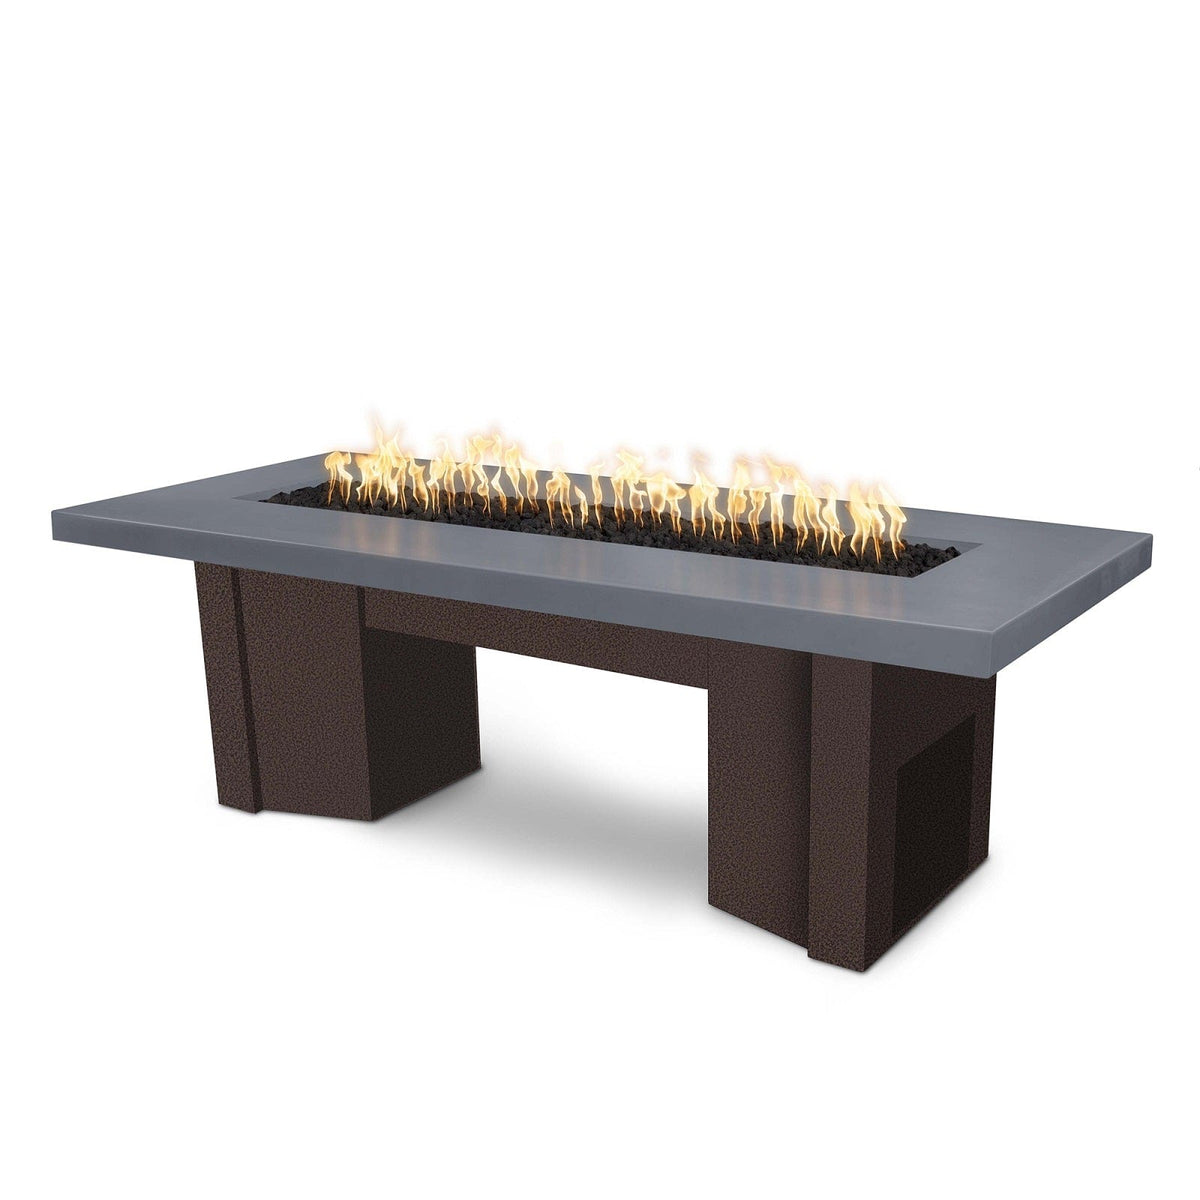 The Outdoor Plus Fire Features Gray (-GRY) / Copper Vein Powder Coated Steel (-CPV) The Outdoor Plus 78&quot; Alameda Fire Table Smooth Concrete in Liquid Propane - Match Lit / OPT-ALMGFRC78-LP